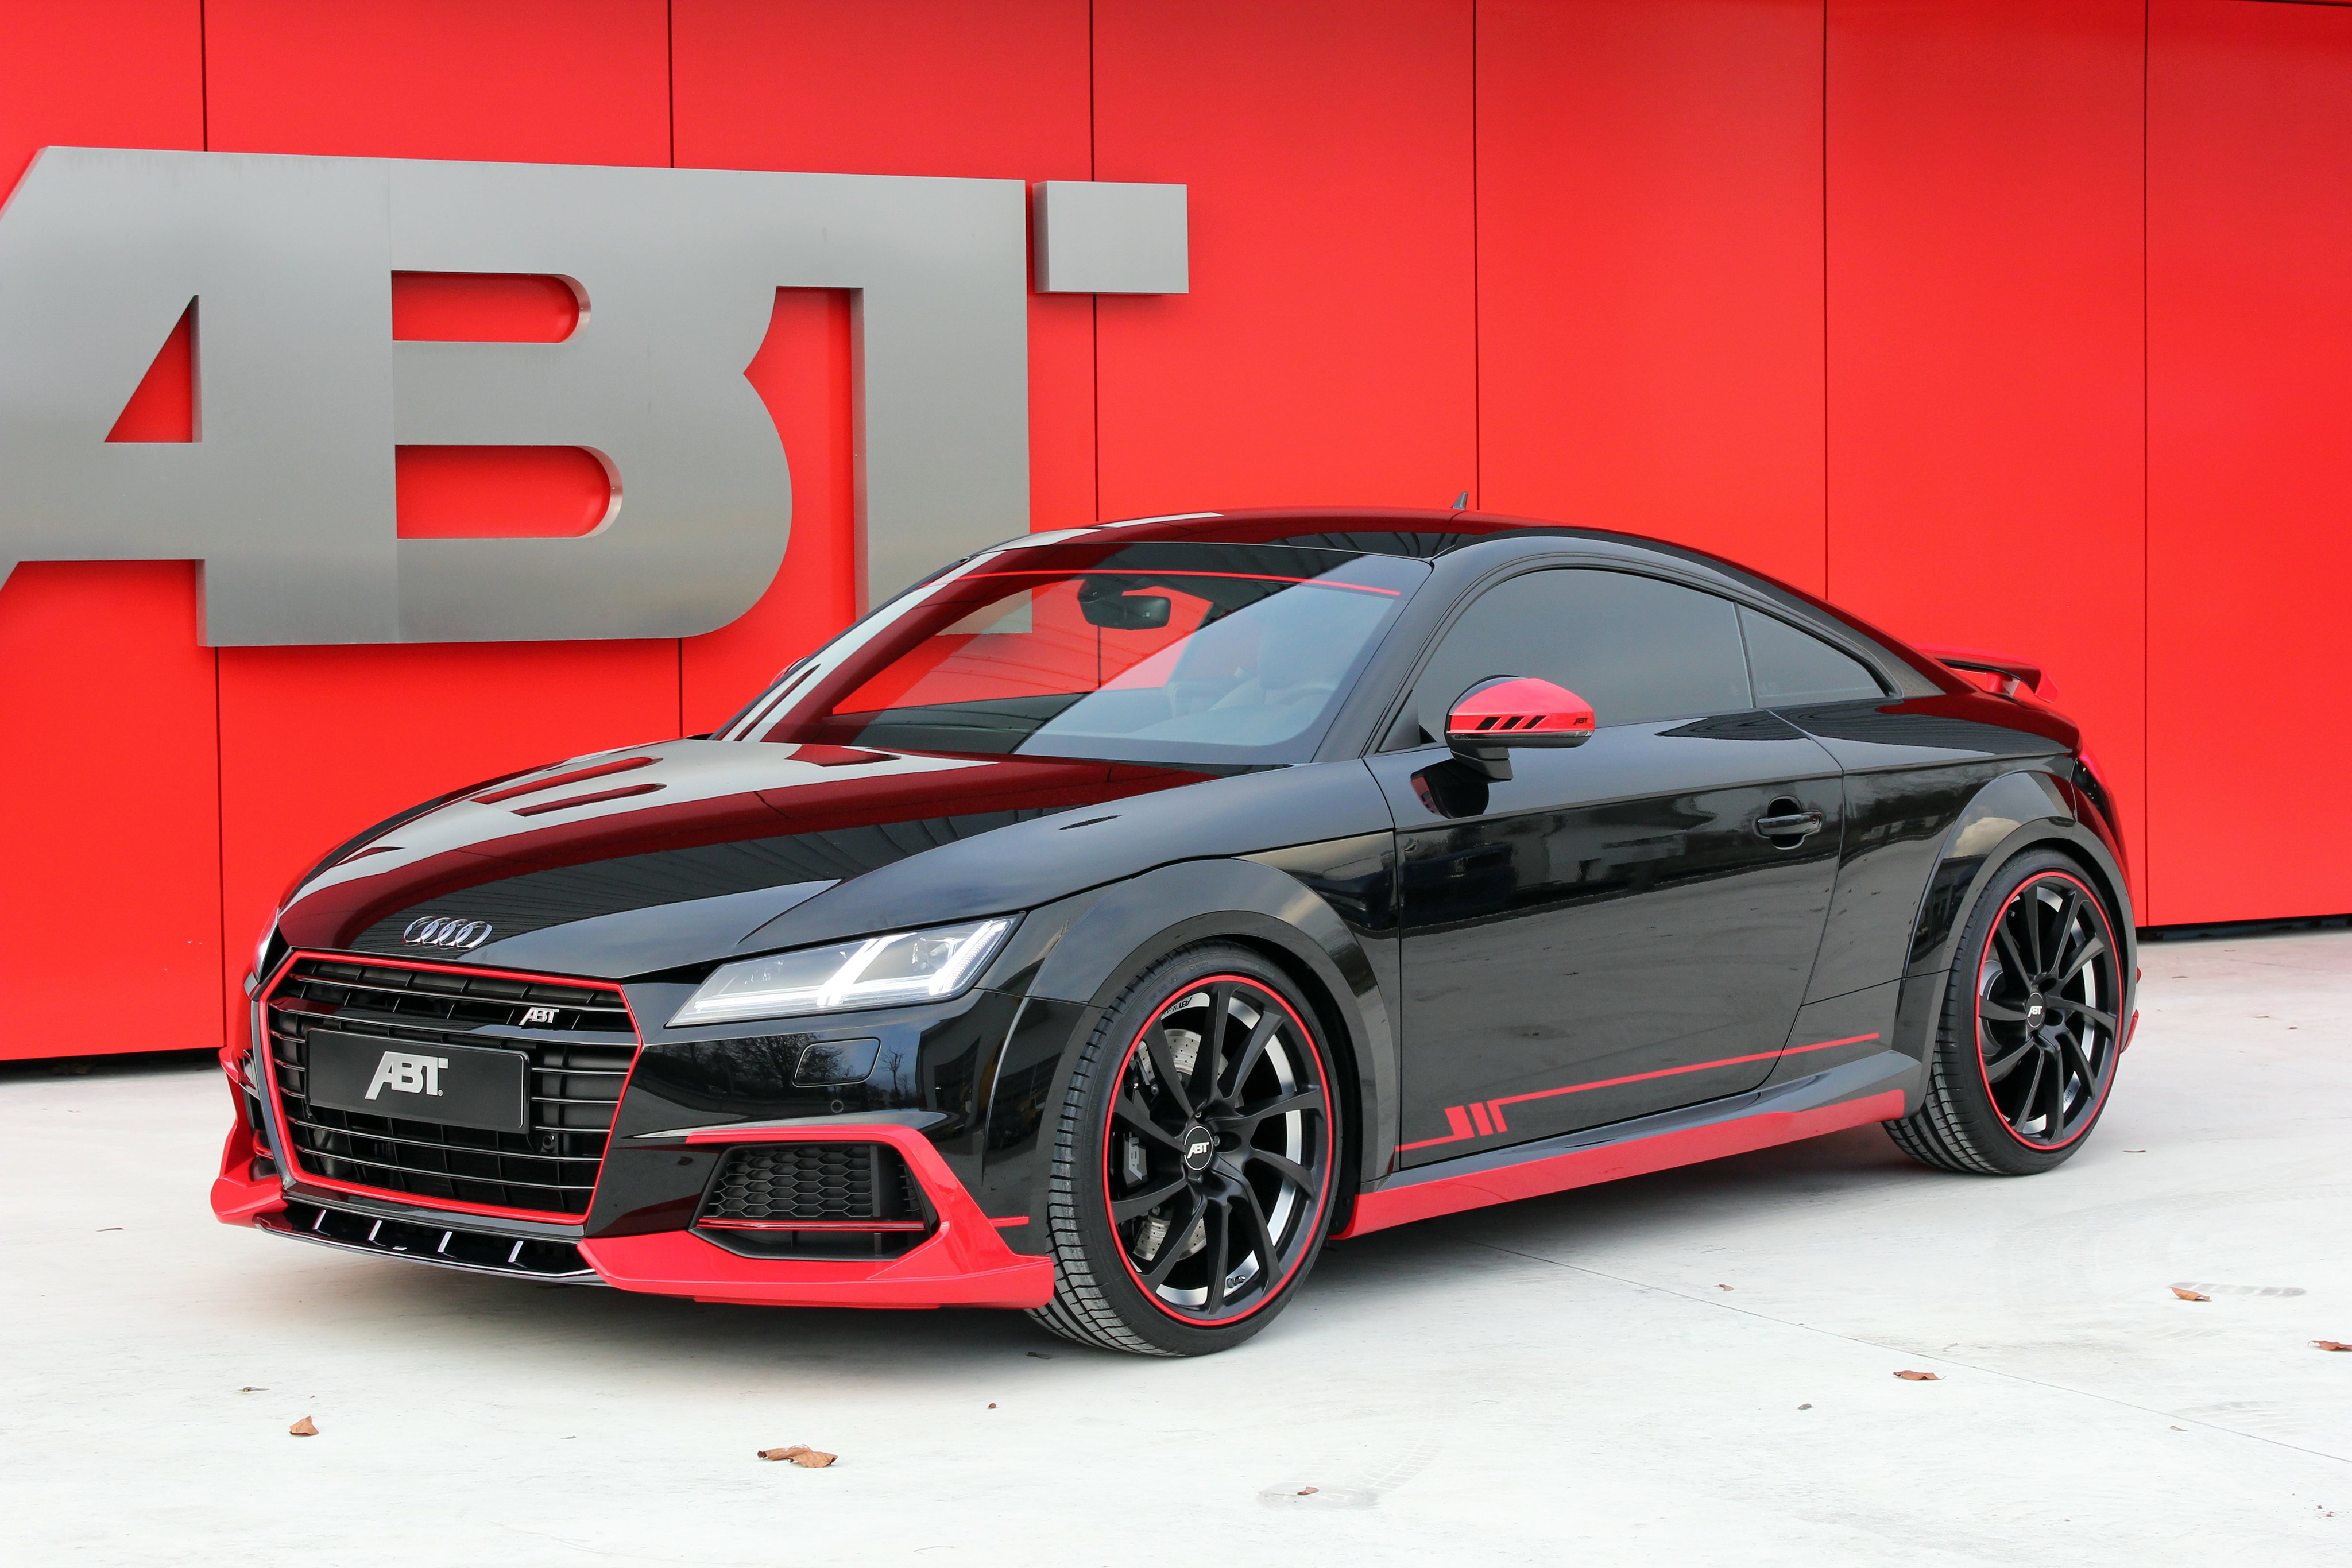 2014, Abt, Audi, T t, Coupe, 8 s, Tuning Wallpaper